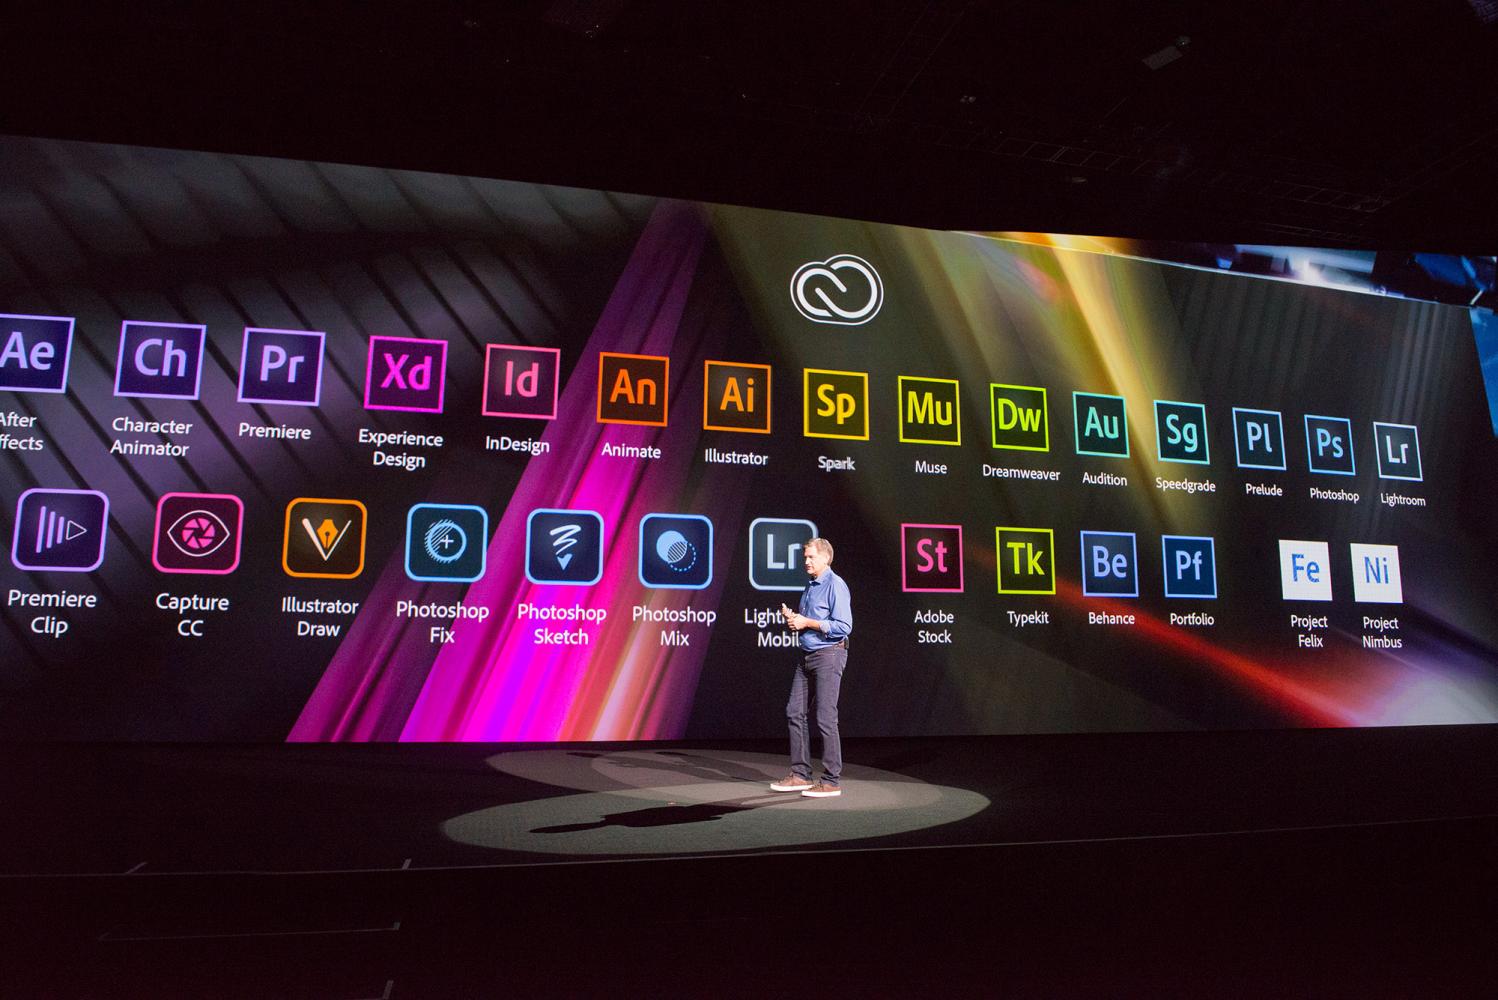 Registration for Adobe MAX 2021 is OPEN - stays online and free